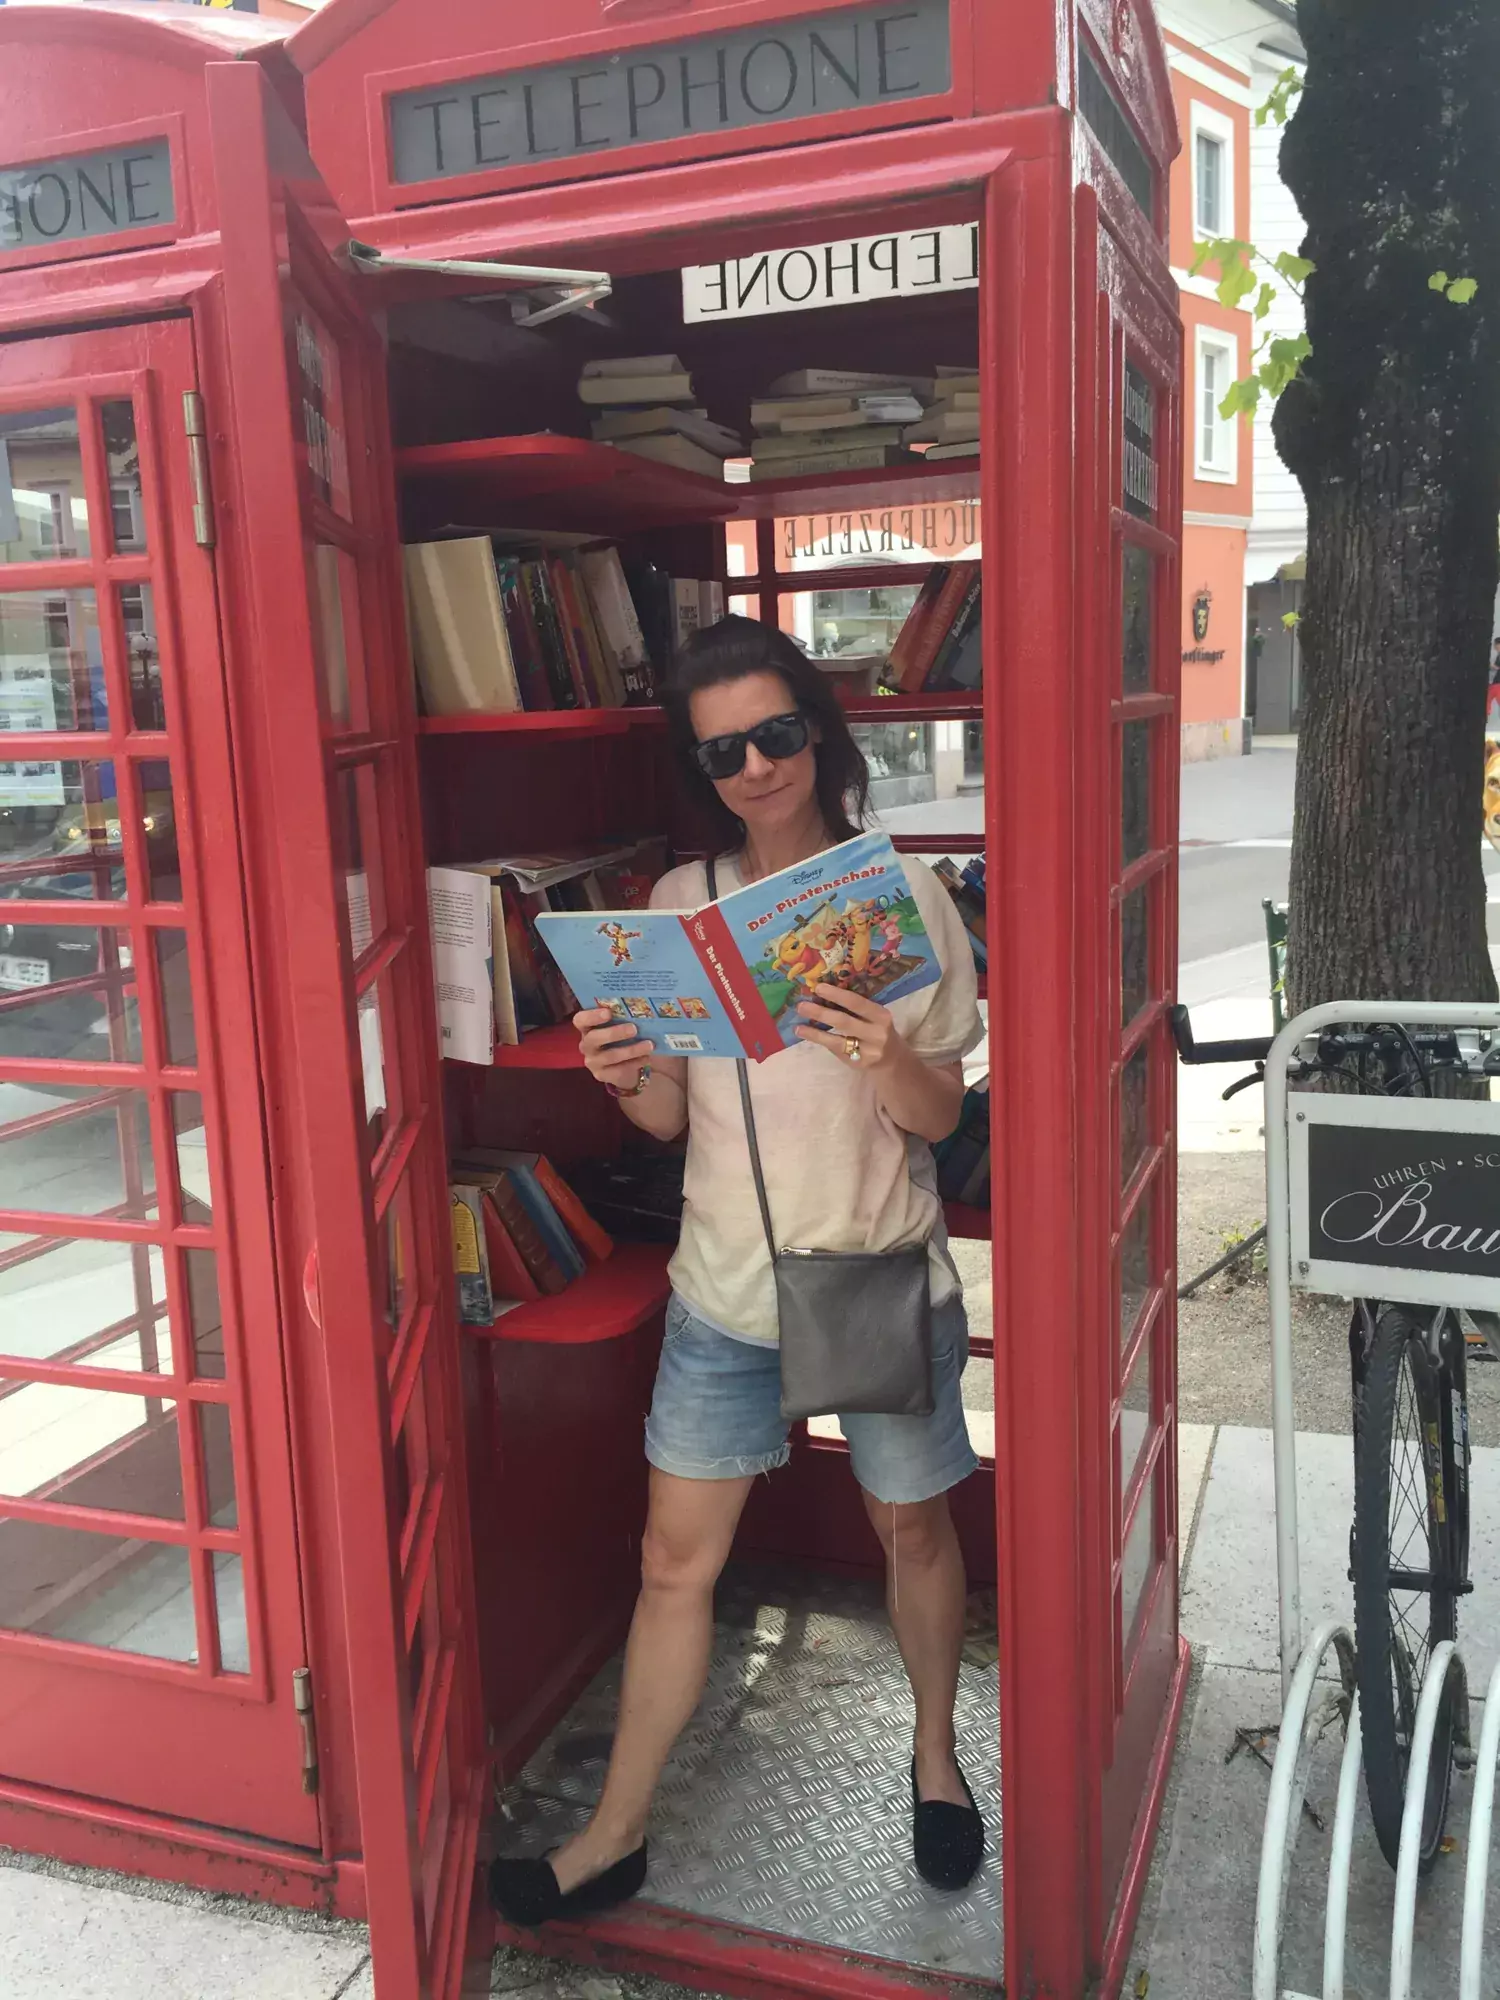 Marie Carlén in a telephone booth, reading a magazine. The telephone booth is a library filled with books.